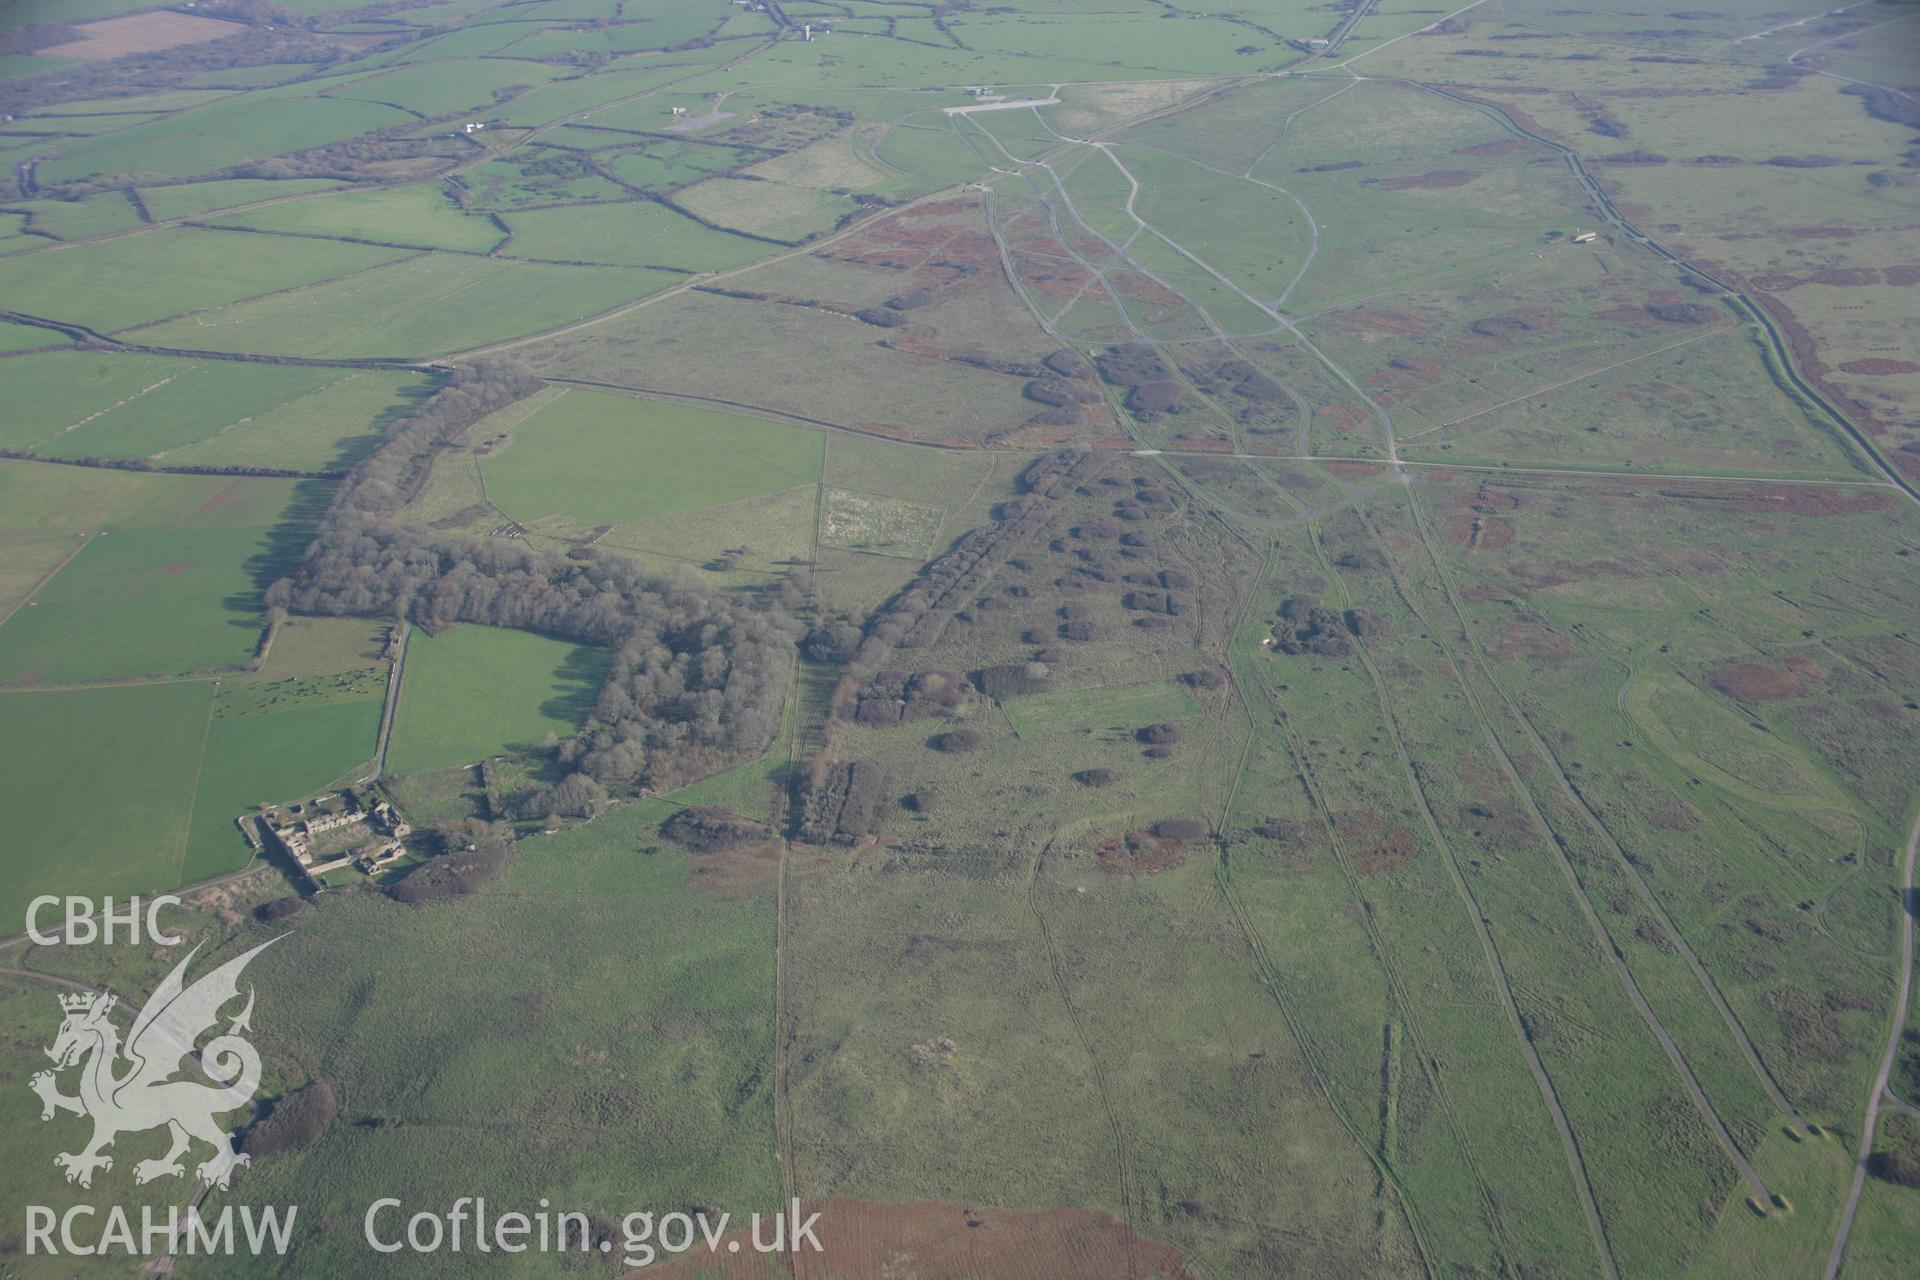 RCAHMW colour oblique aerial photograph of Brownslade Round Barrow, and early medieval cemetery, Castlemartin, in wide landscape view from the west. Taken on 19 November 2005 by Toby Driver